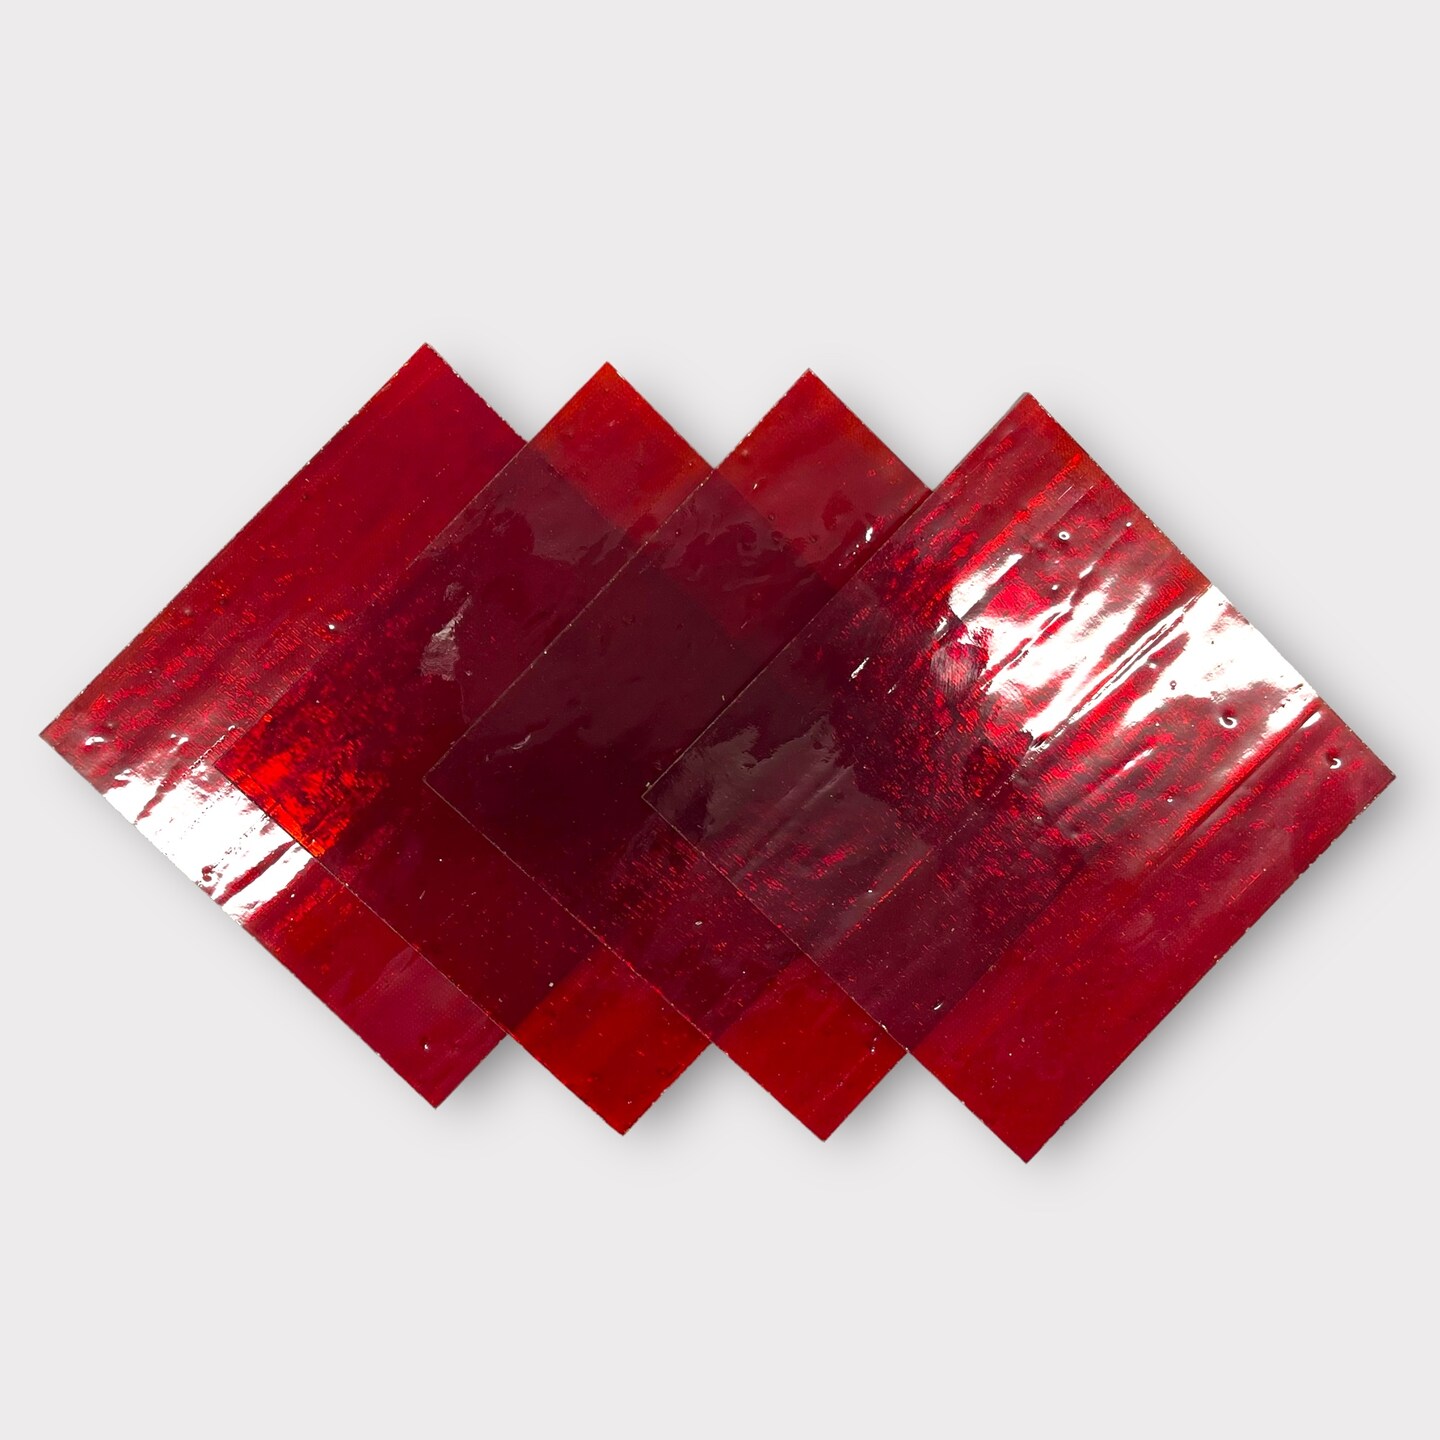 Dark Red Transparent COE 96 Fusible Glass Sheets / Mosaic Squares - 4 Pack